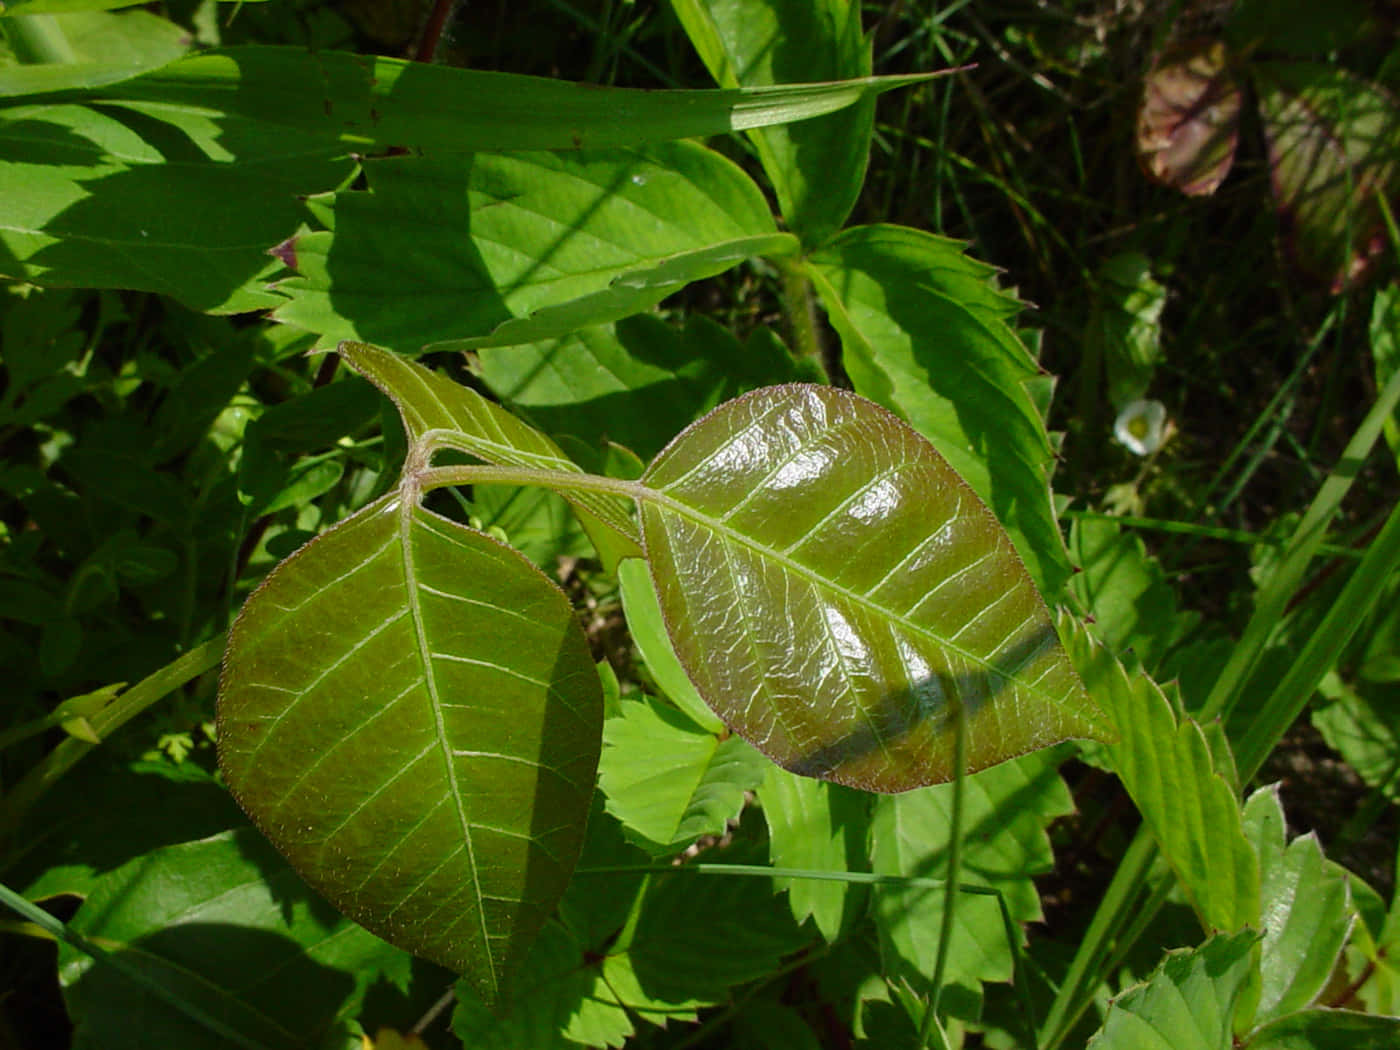 A Leaf With A Brown Color